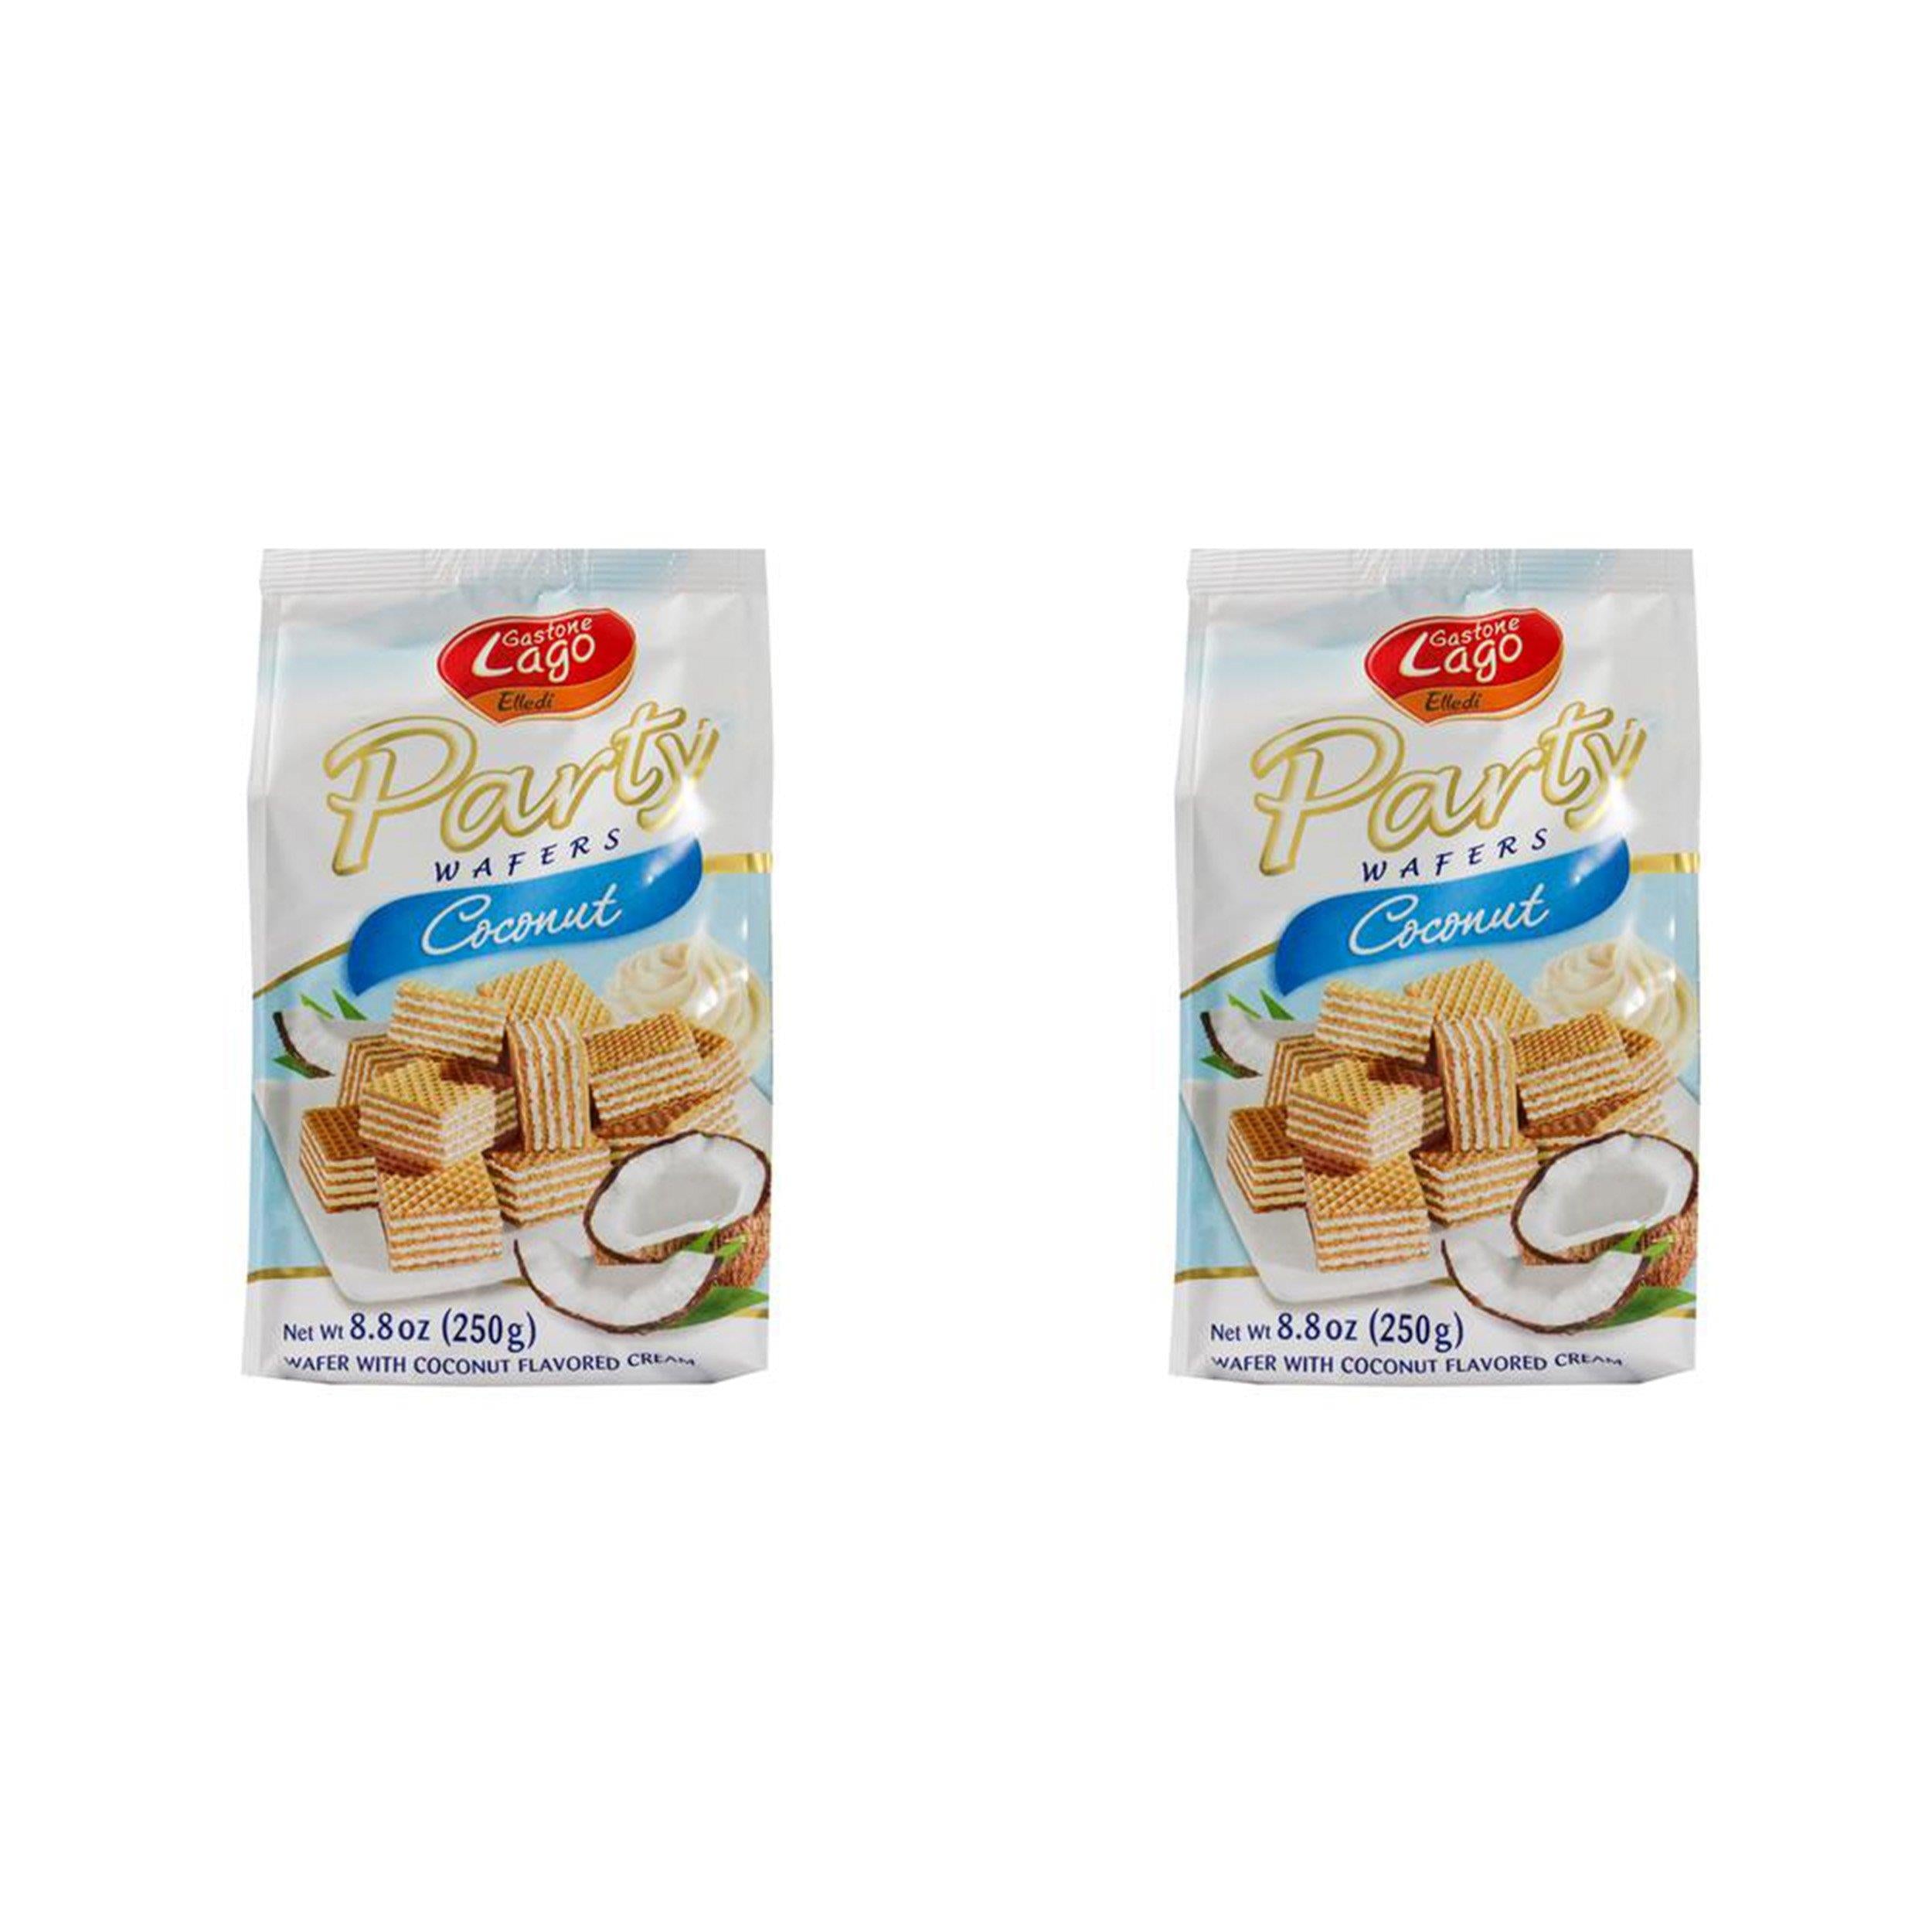 Gastone Lago Party Wafers Coconut Cream Filling 8.82 oz, 250g (Pack of 2) (Coconut, 2-Pack)